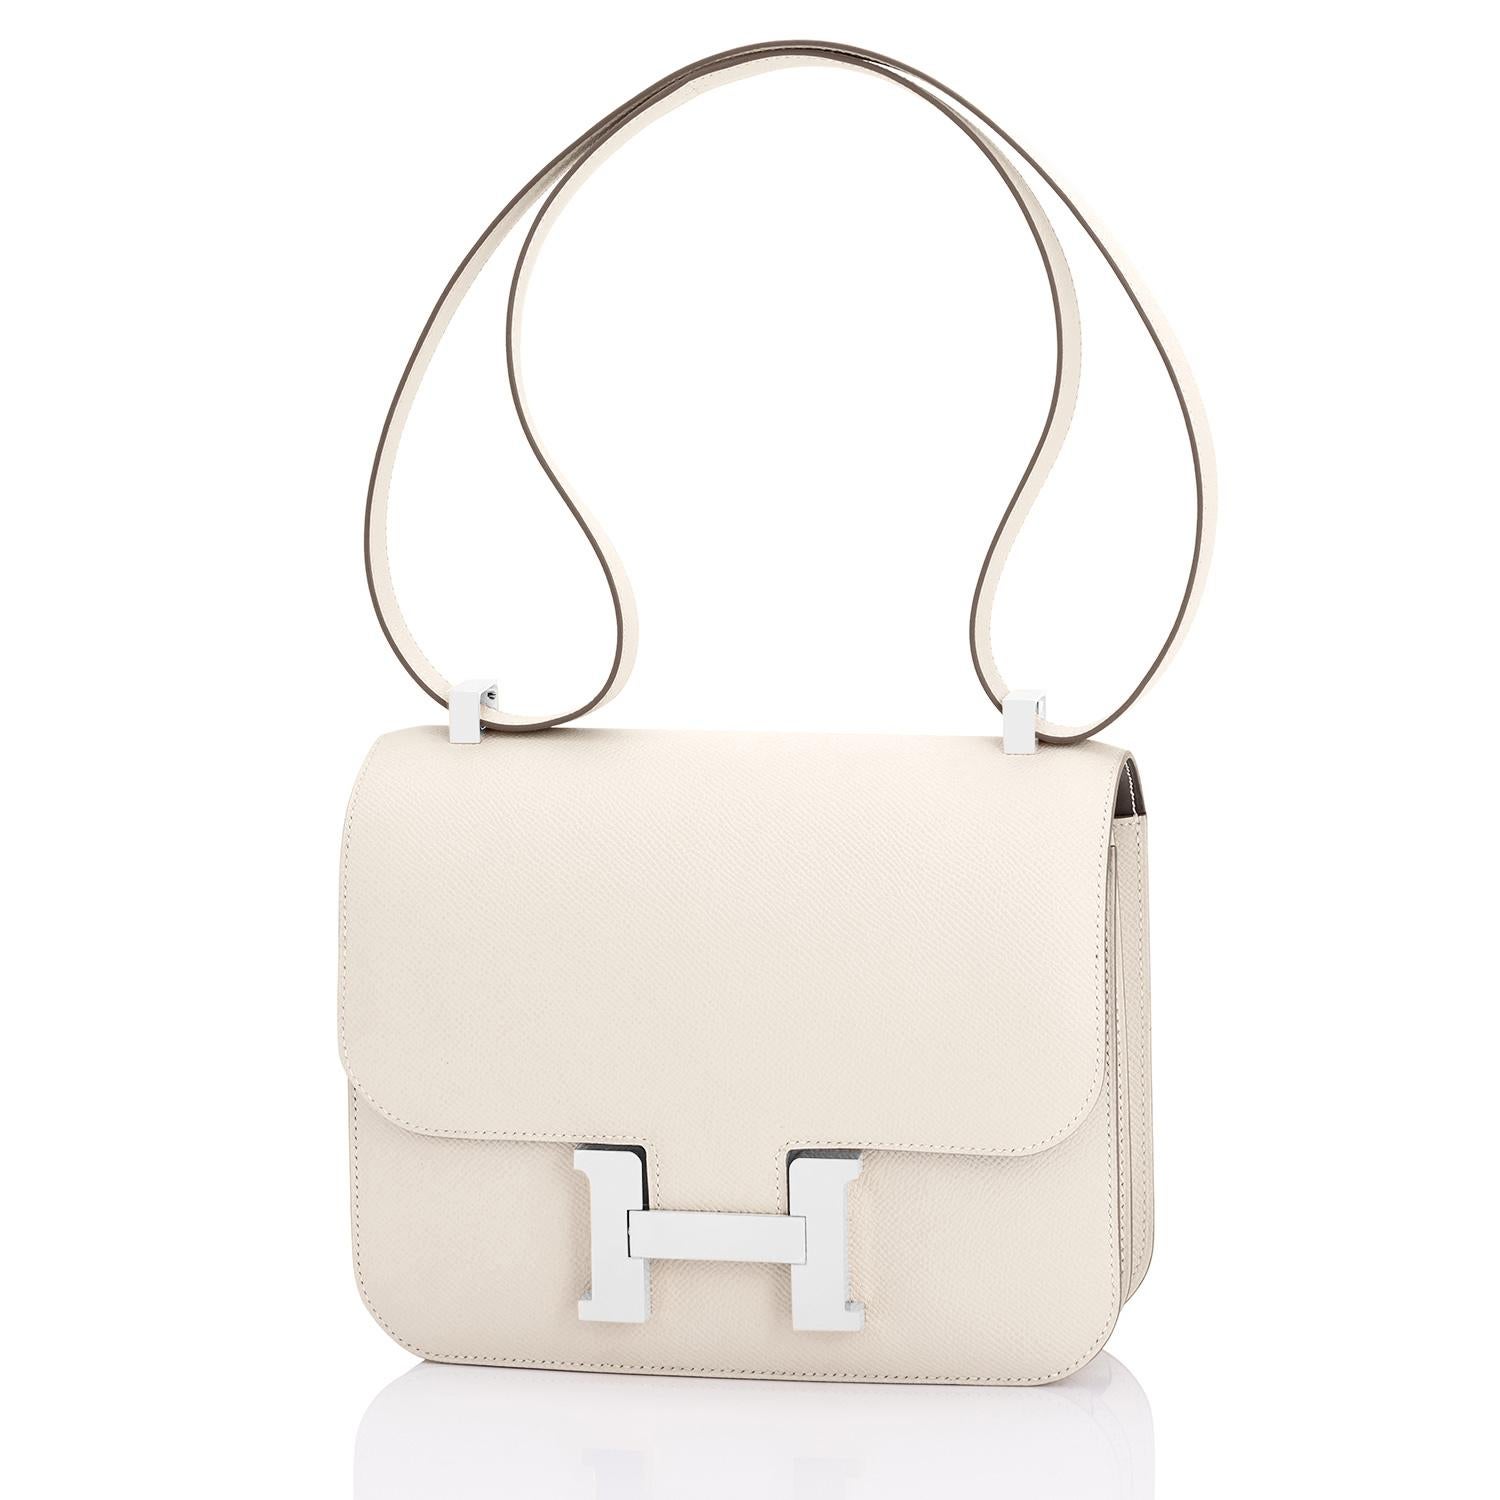 Hermes Nata Off White Cream Epsom Constance 24cm Shoulder Bag Y Stamp, 2020
Just purchased from Hermes store; bag bears new 2020 interior Y stamp.
Perfect Gift! Brand New in Box. Store Fresh in Pristine Condition (with plastic on hardware).
Nata